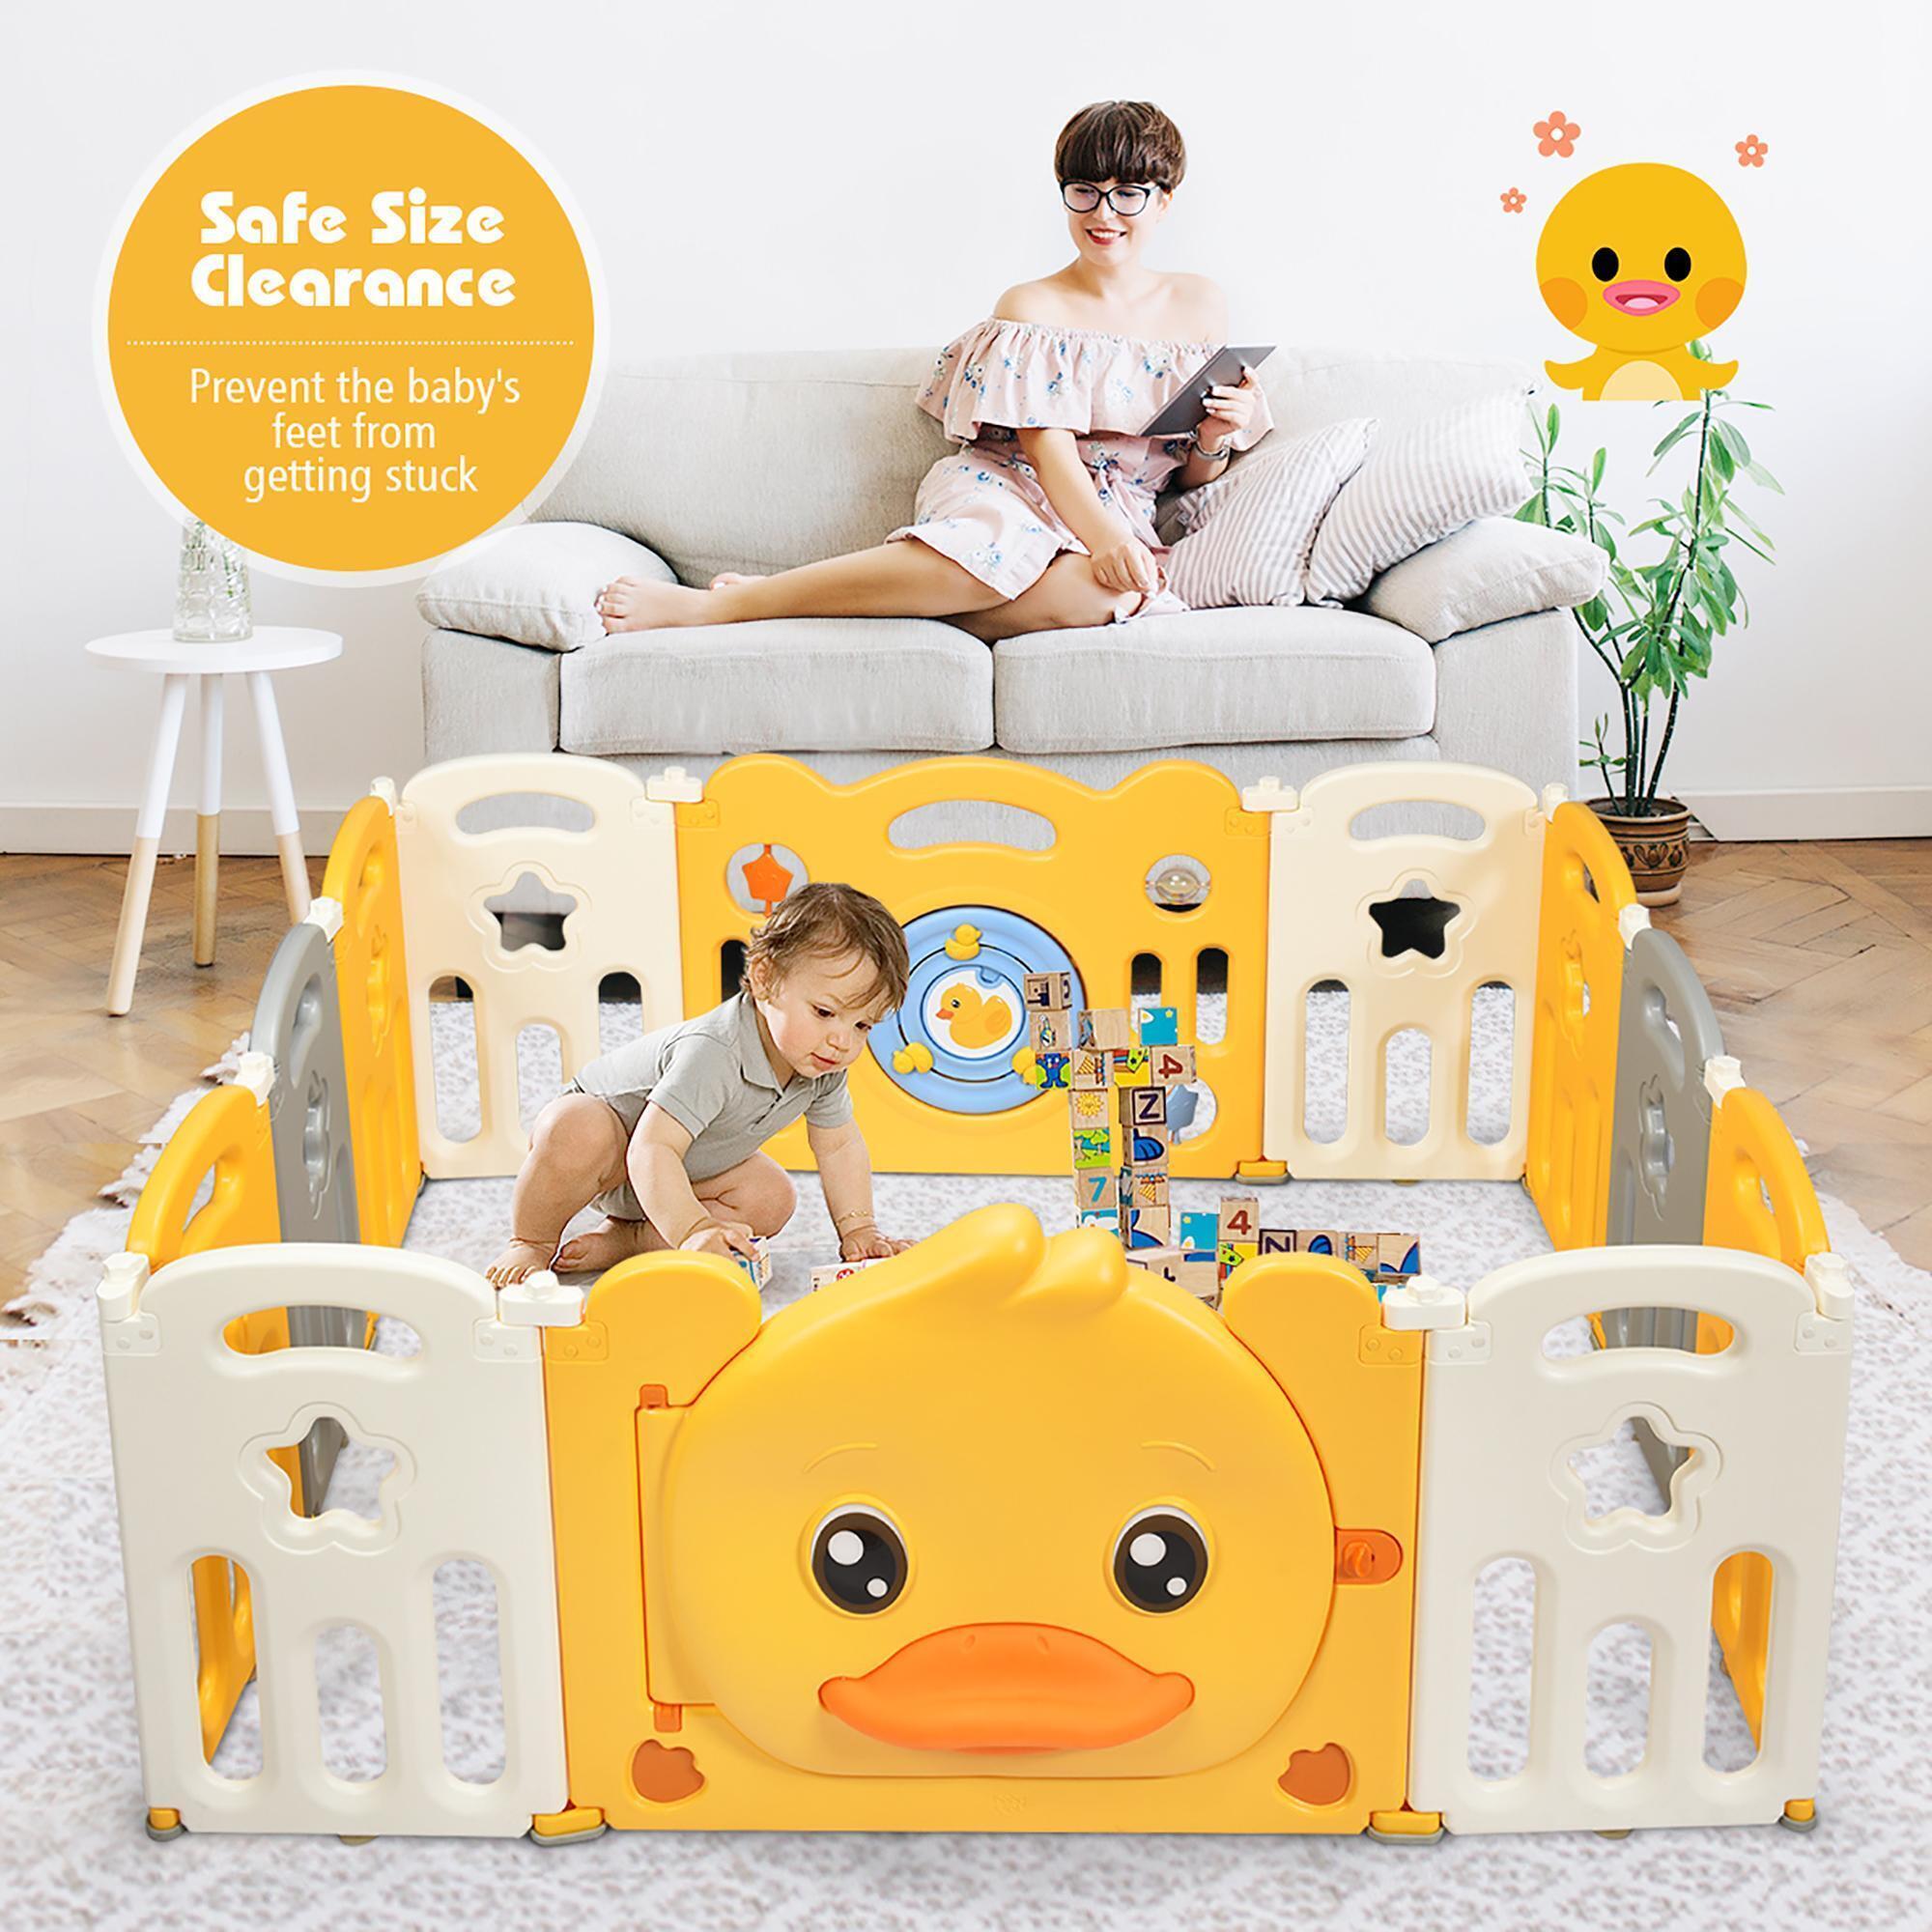 Costway 12-Panel Foldable Baby Playpen Kids Yellow Duck Yard Activity Center with Sound alternate image